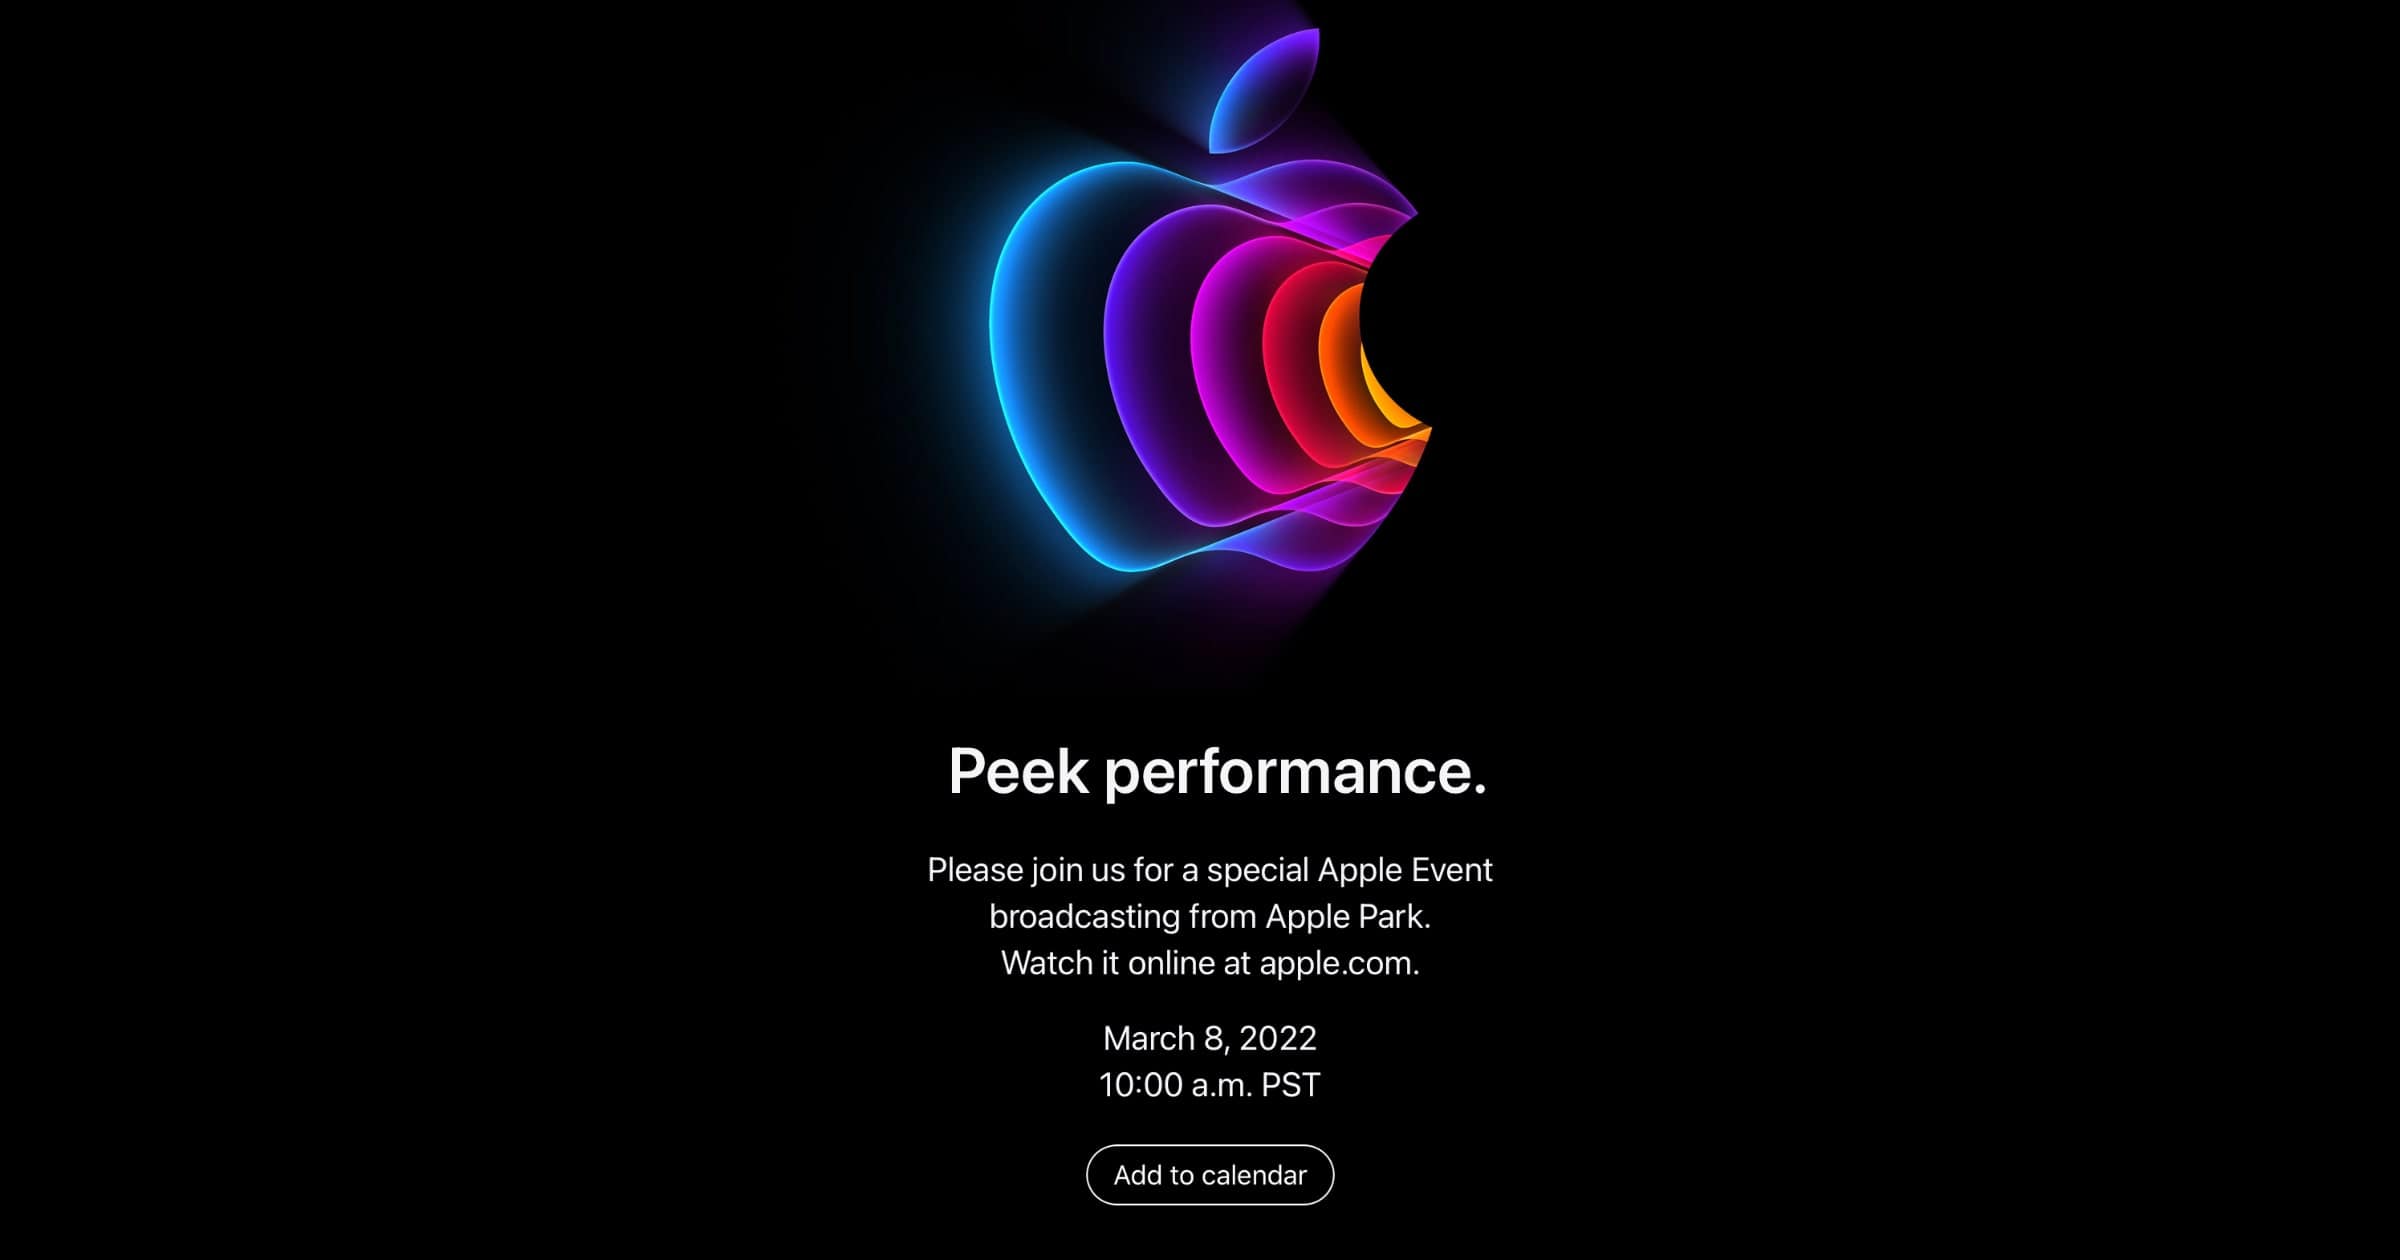 What to Expect From Apple’s ‘Peek Performance’ Event